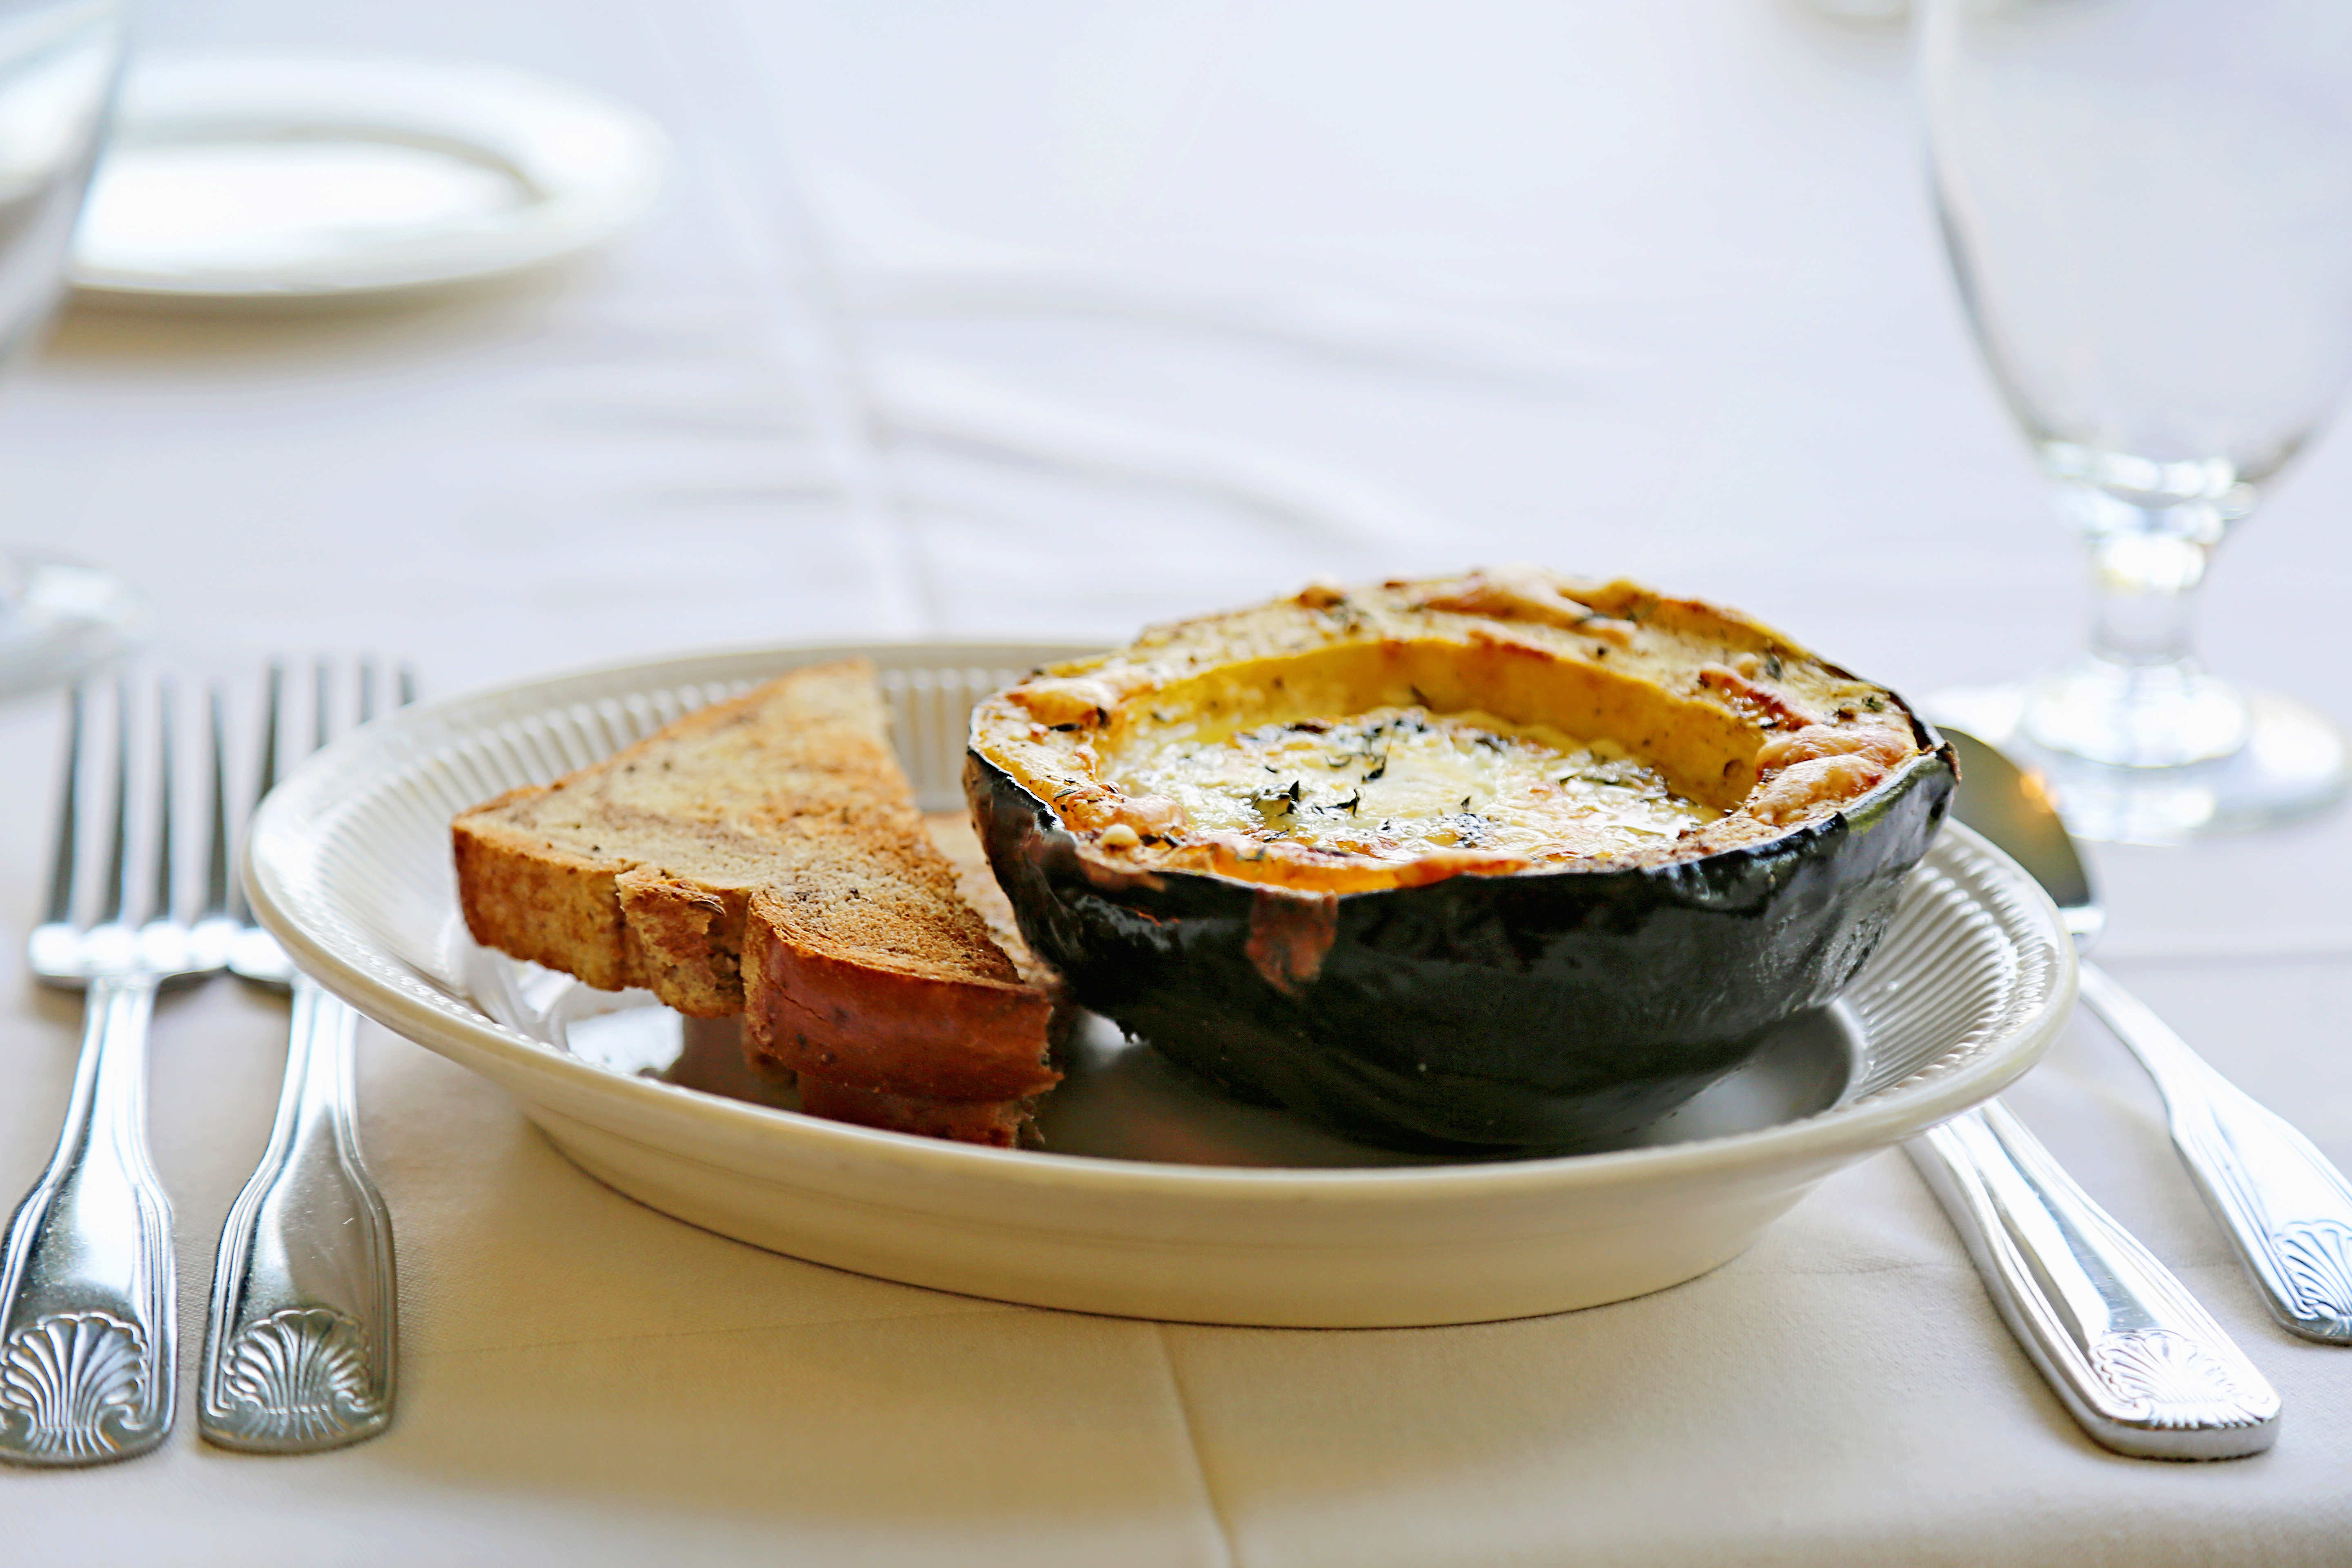 acorn squash on a white plate with silverware on the side